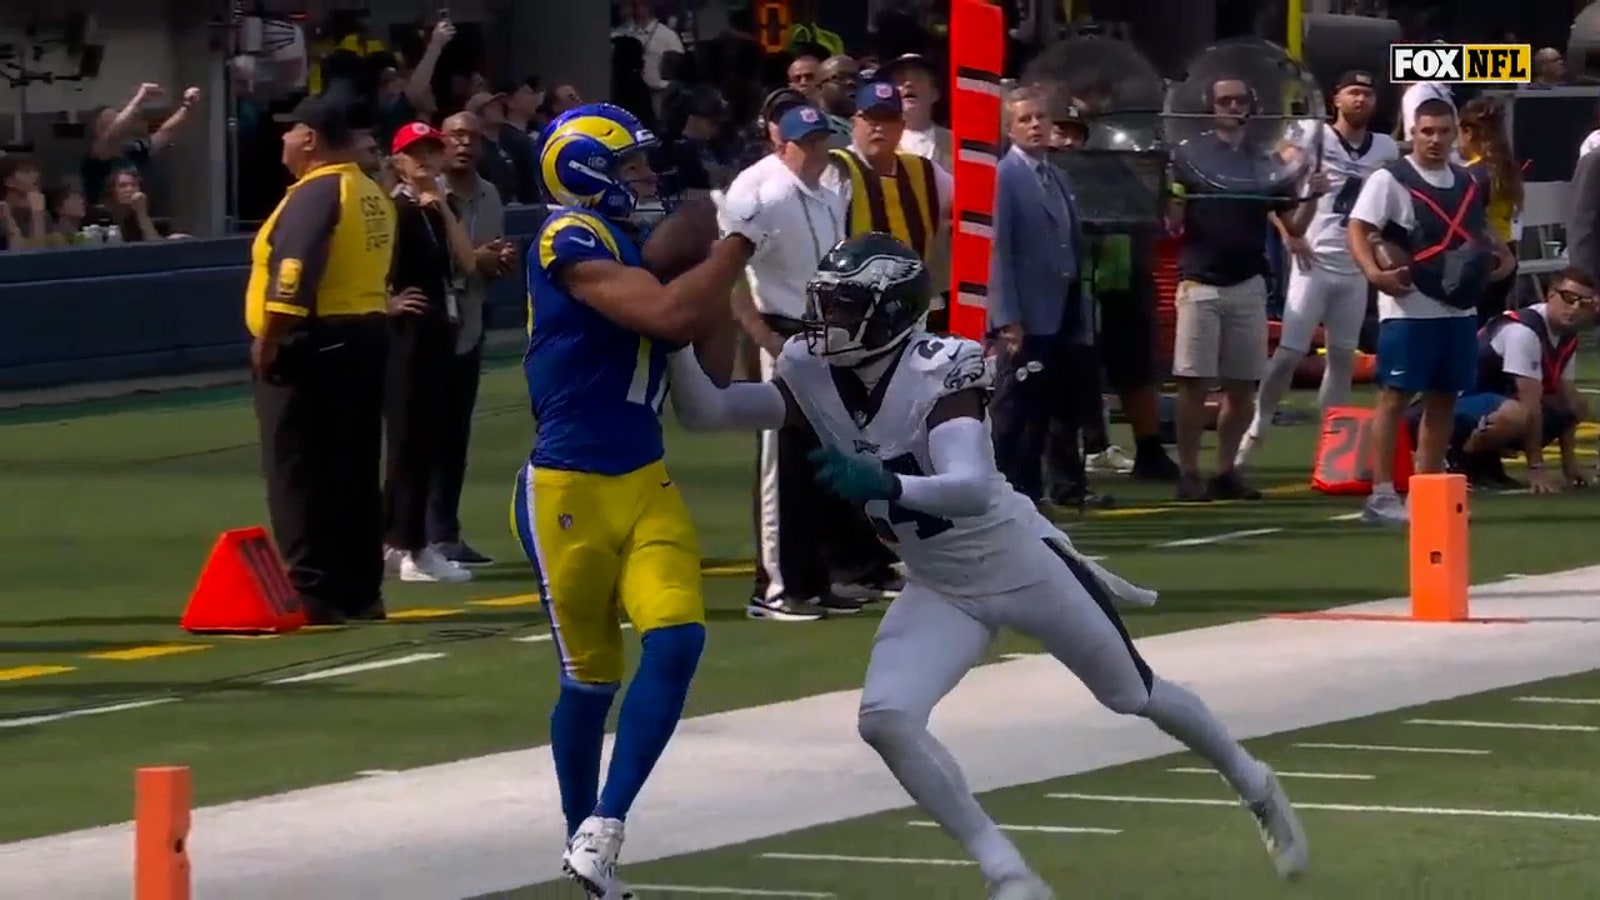 Puka Nacua makes a TOUGH catch for a 22-yard TD to give Rams the lead